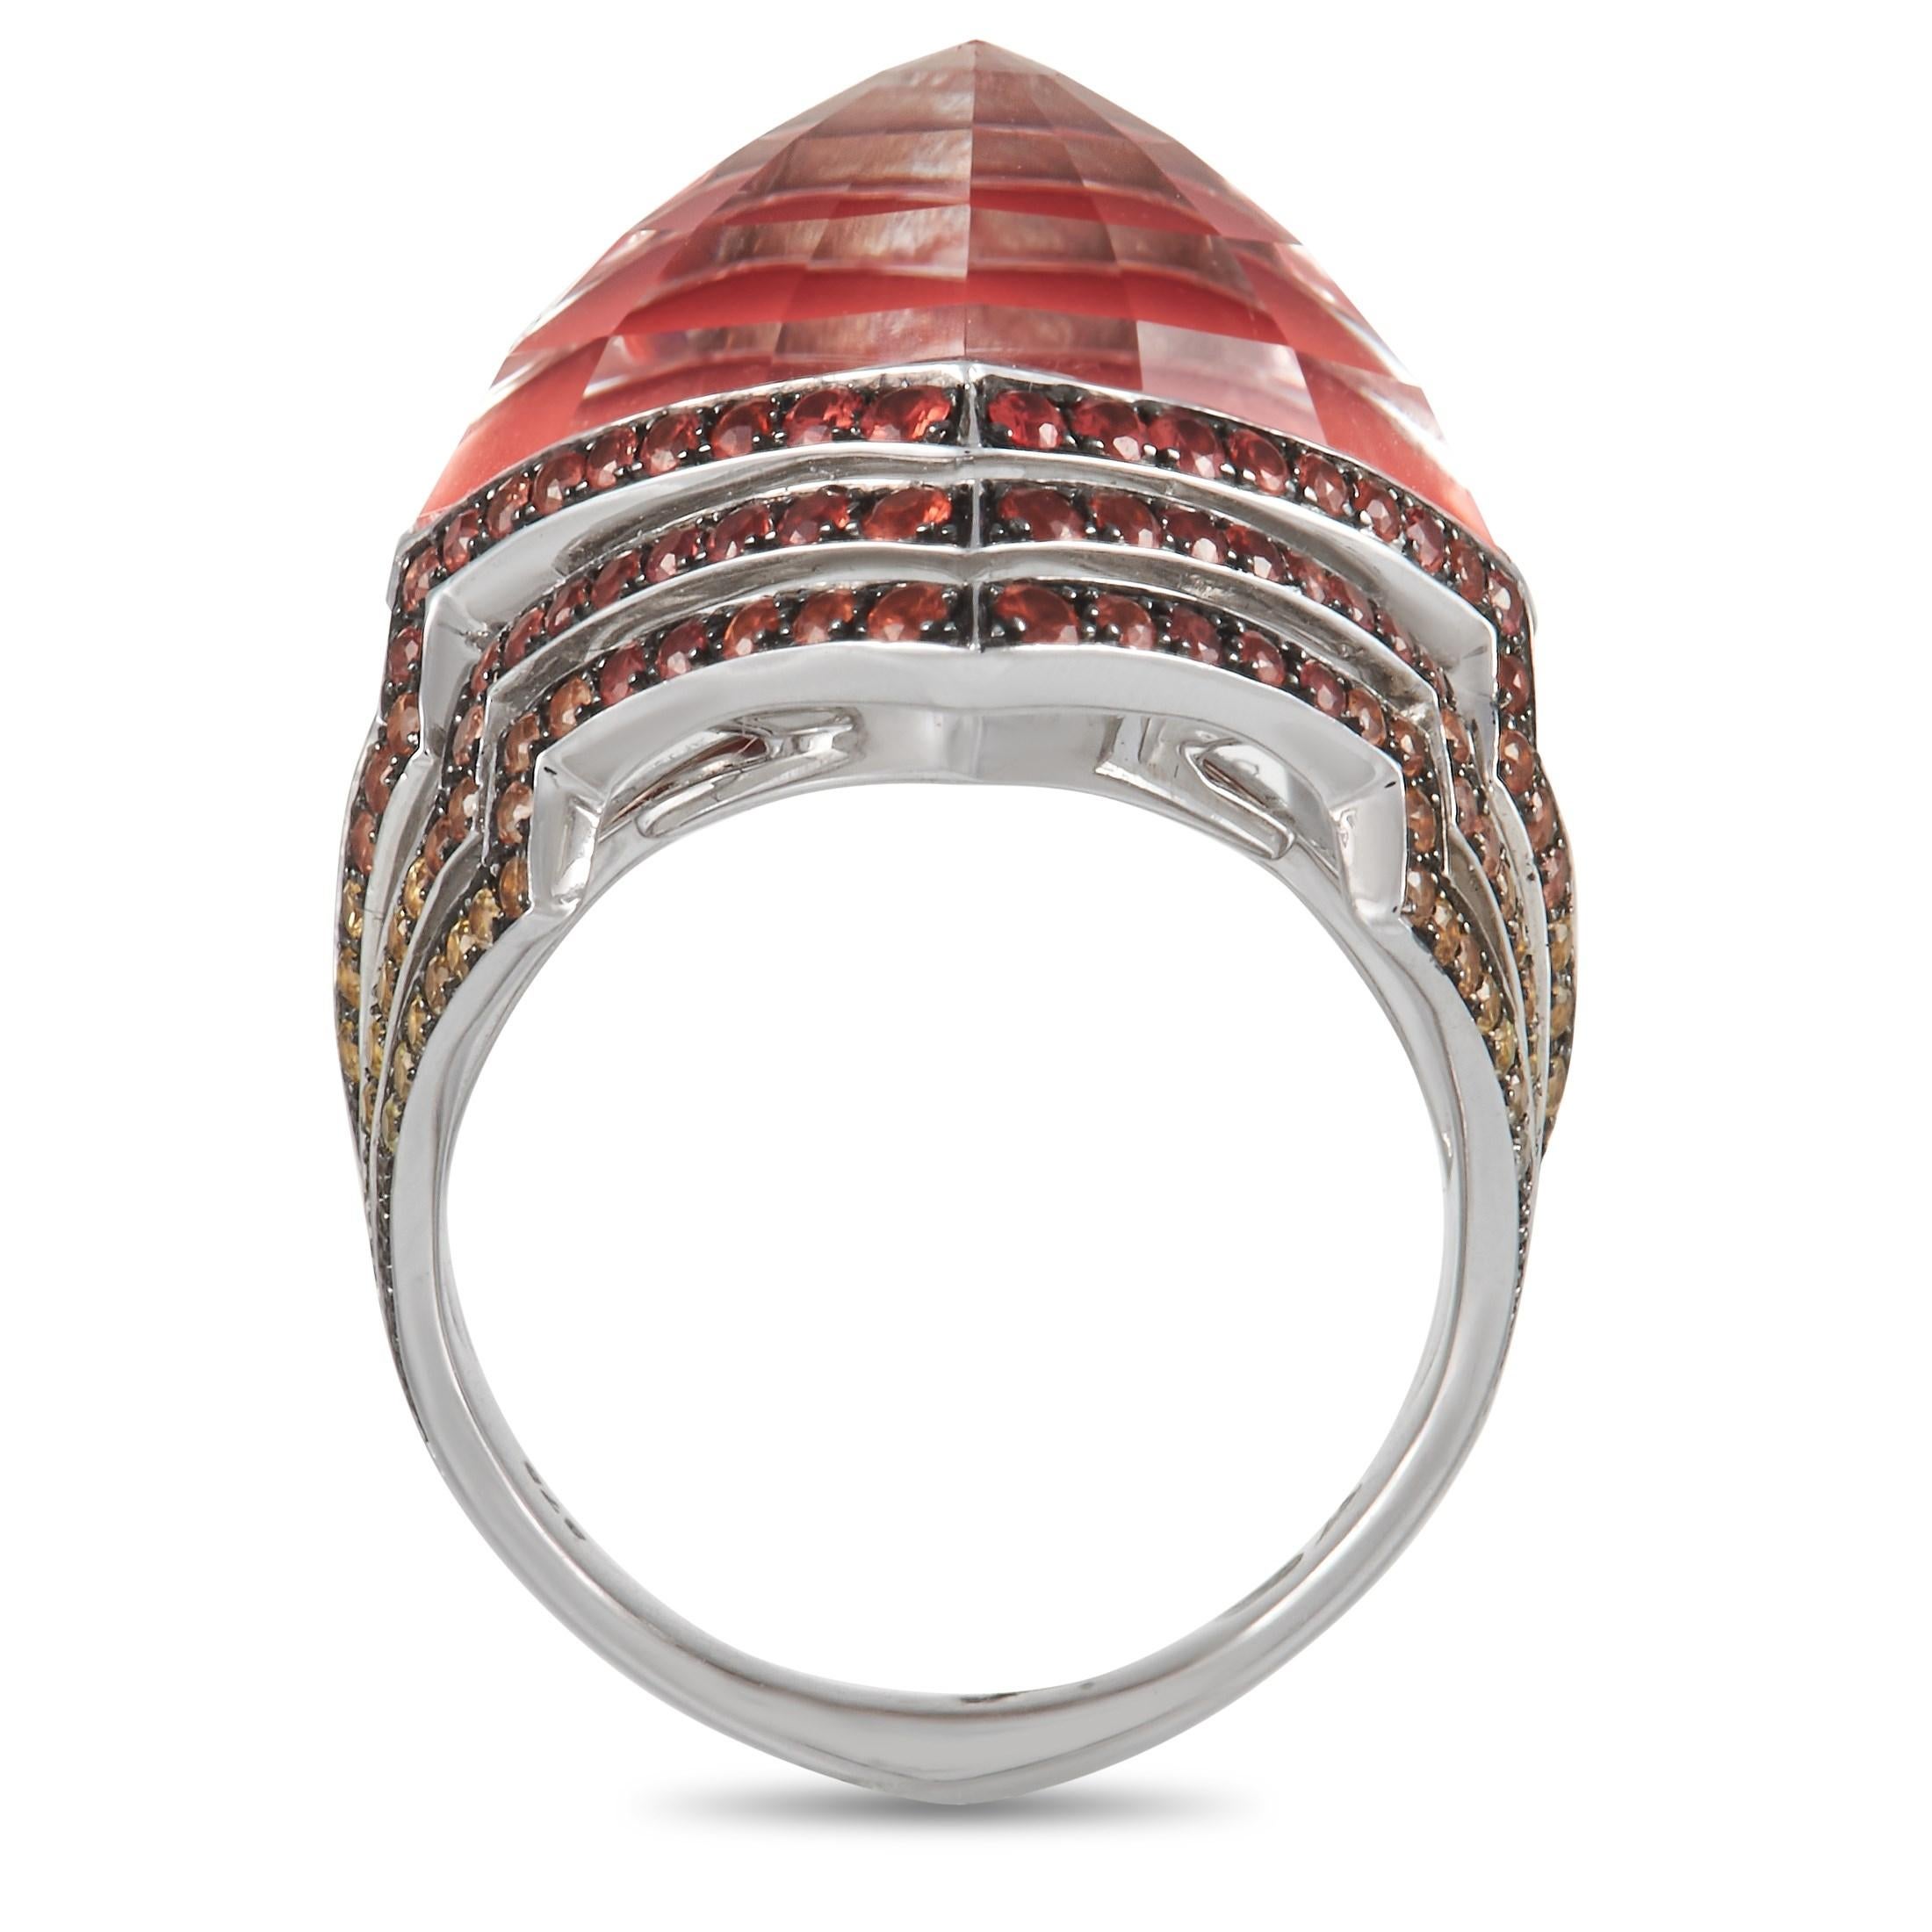 Infuse a bit of pizzazz to your classic wardrobe with this Stephen Webster ring. It features a 5mm band with a ring top height of 10mm. The ring has a faceted pink opal stone center sitting on top of quartz, giving that captivating Crystal Haze